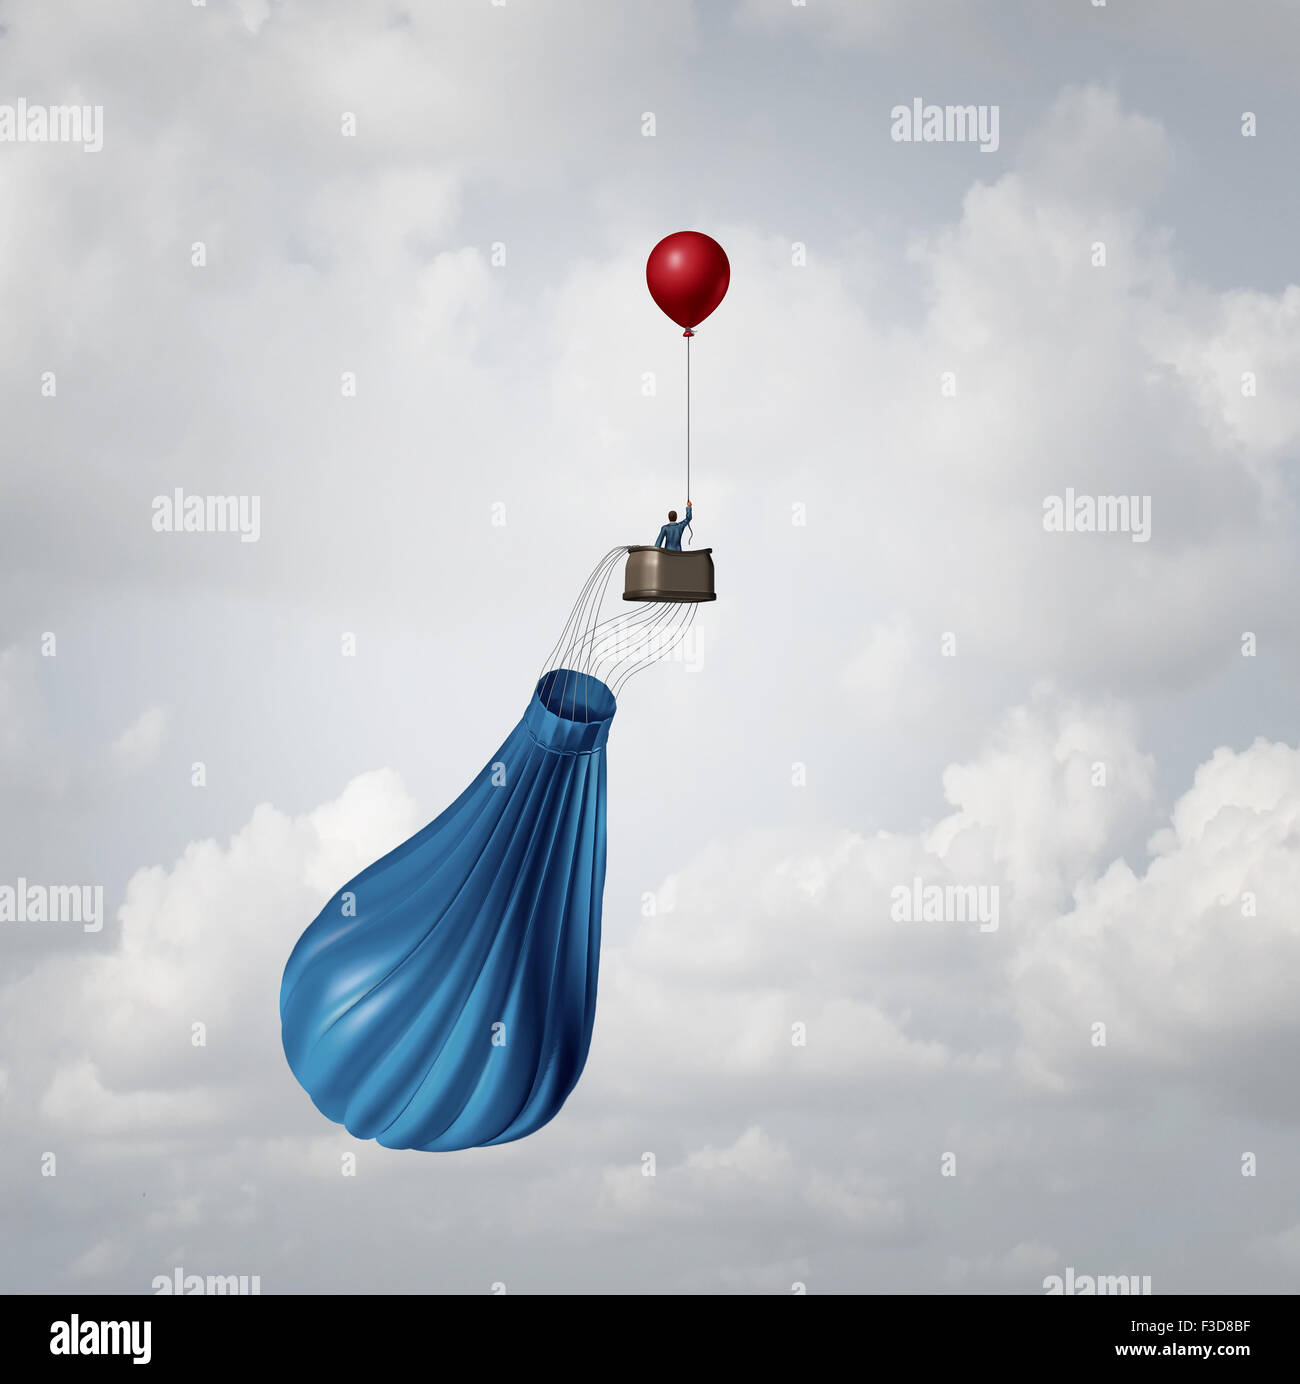 Emergency business plan and crisis management strategy metaphor as a businessman in a broken deflated hot air balloon being saved by a single small balloon as an innovative response solution idea. Stock Photo